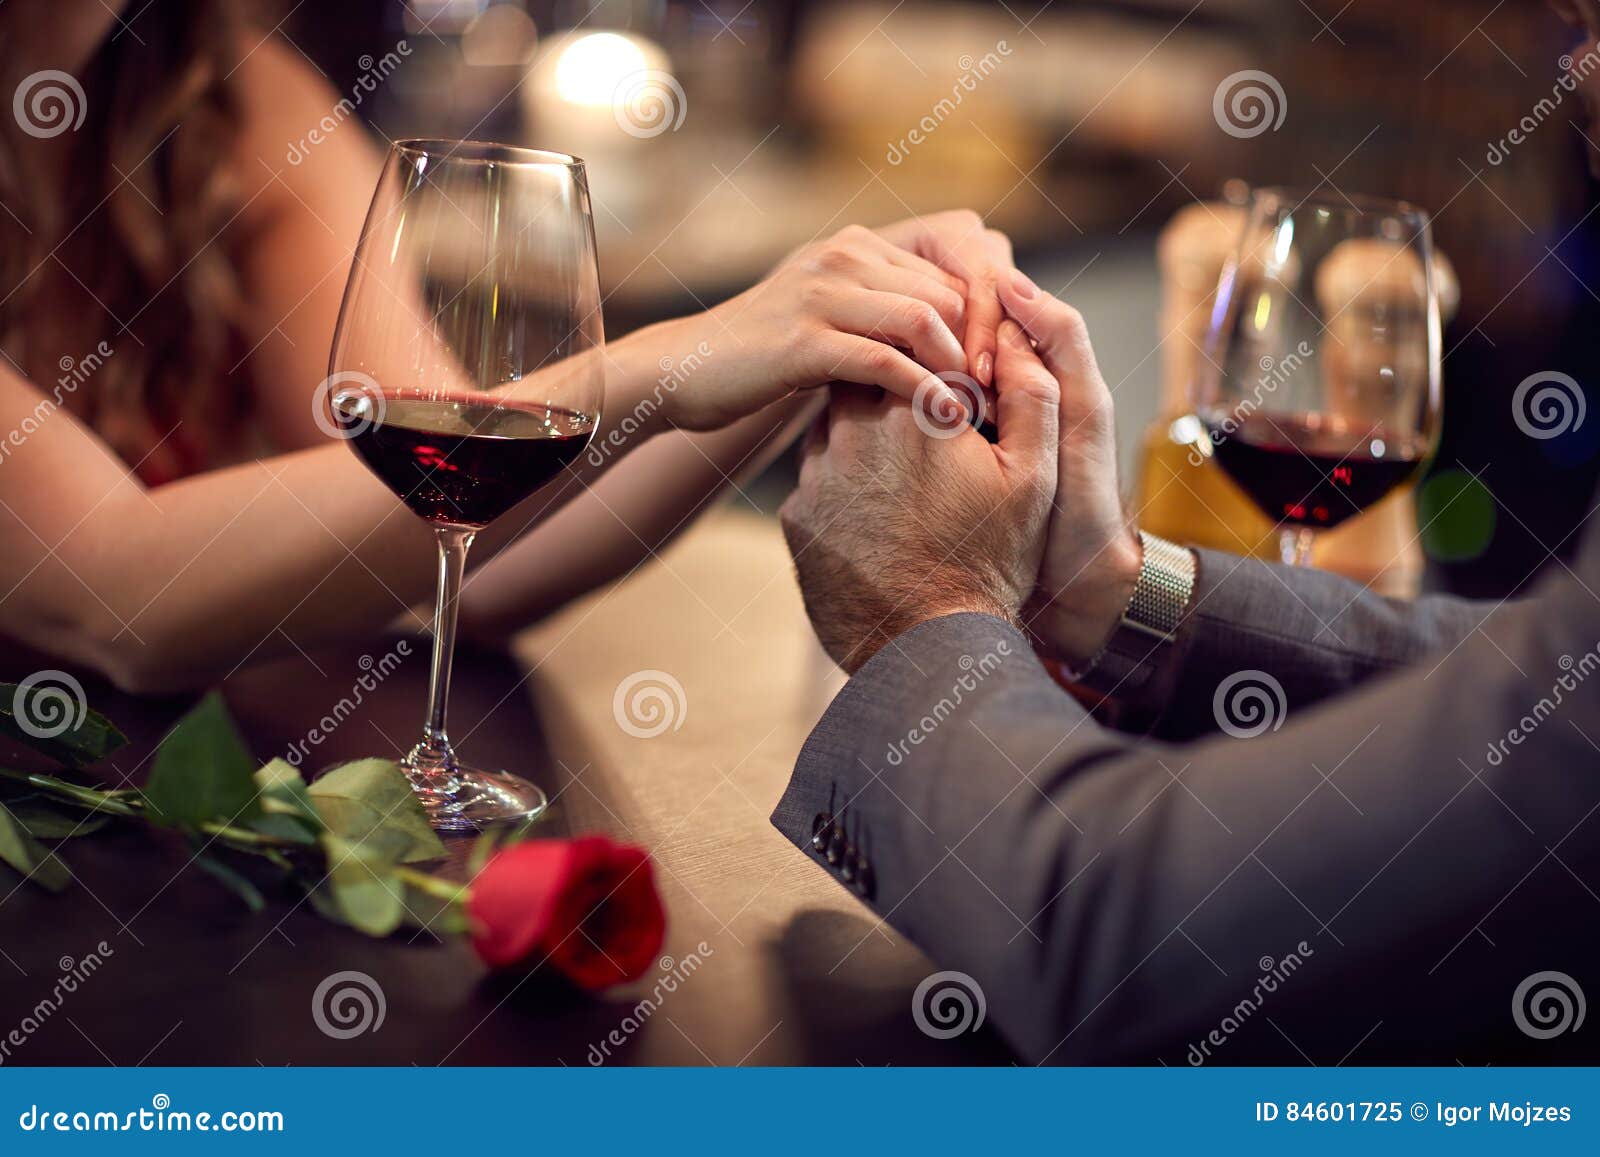 romance at restaurant for valentine`s day-concept